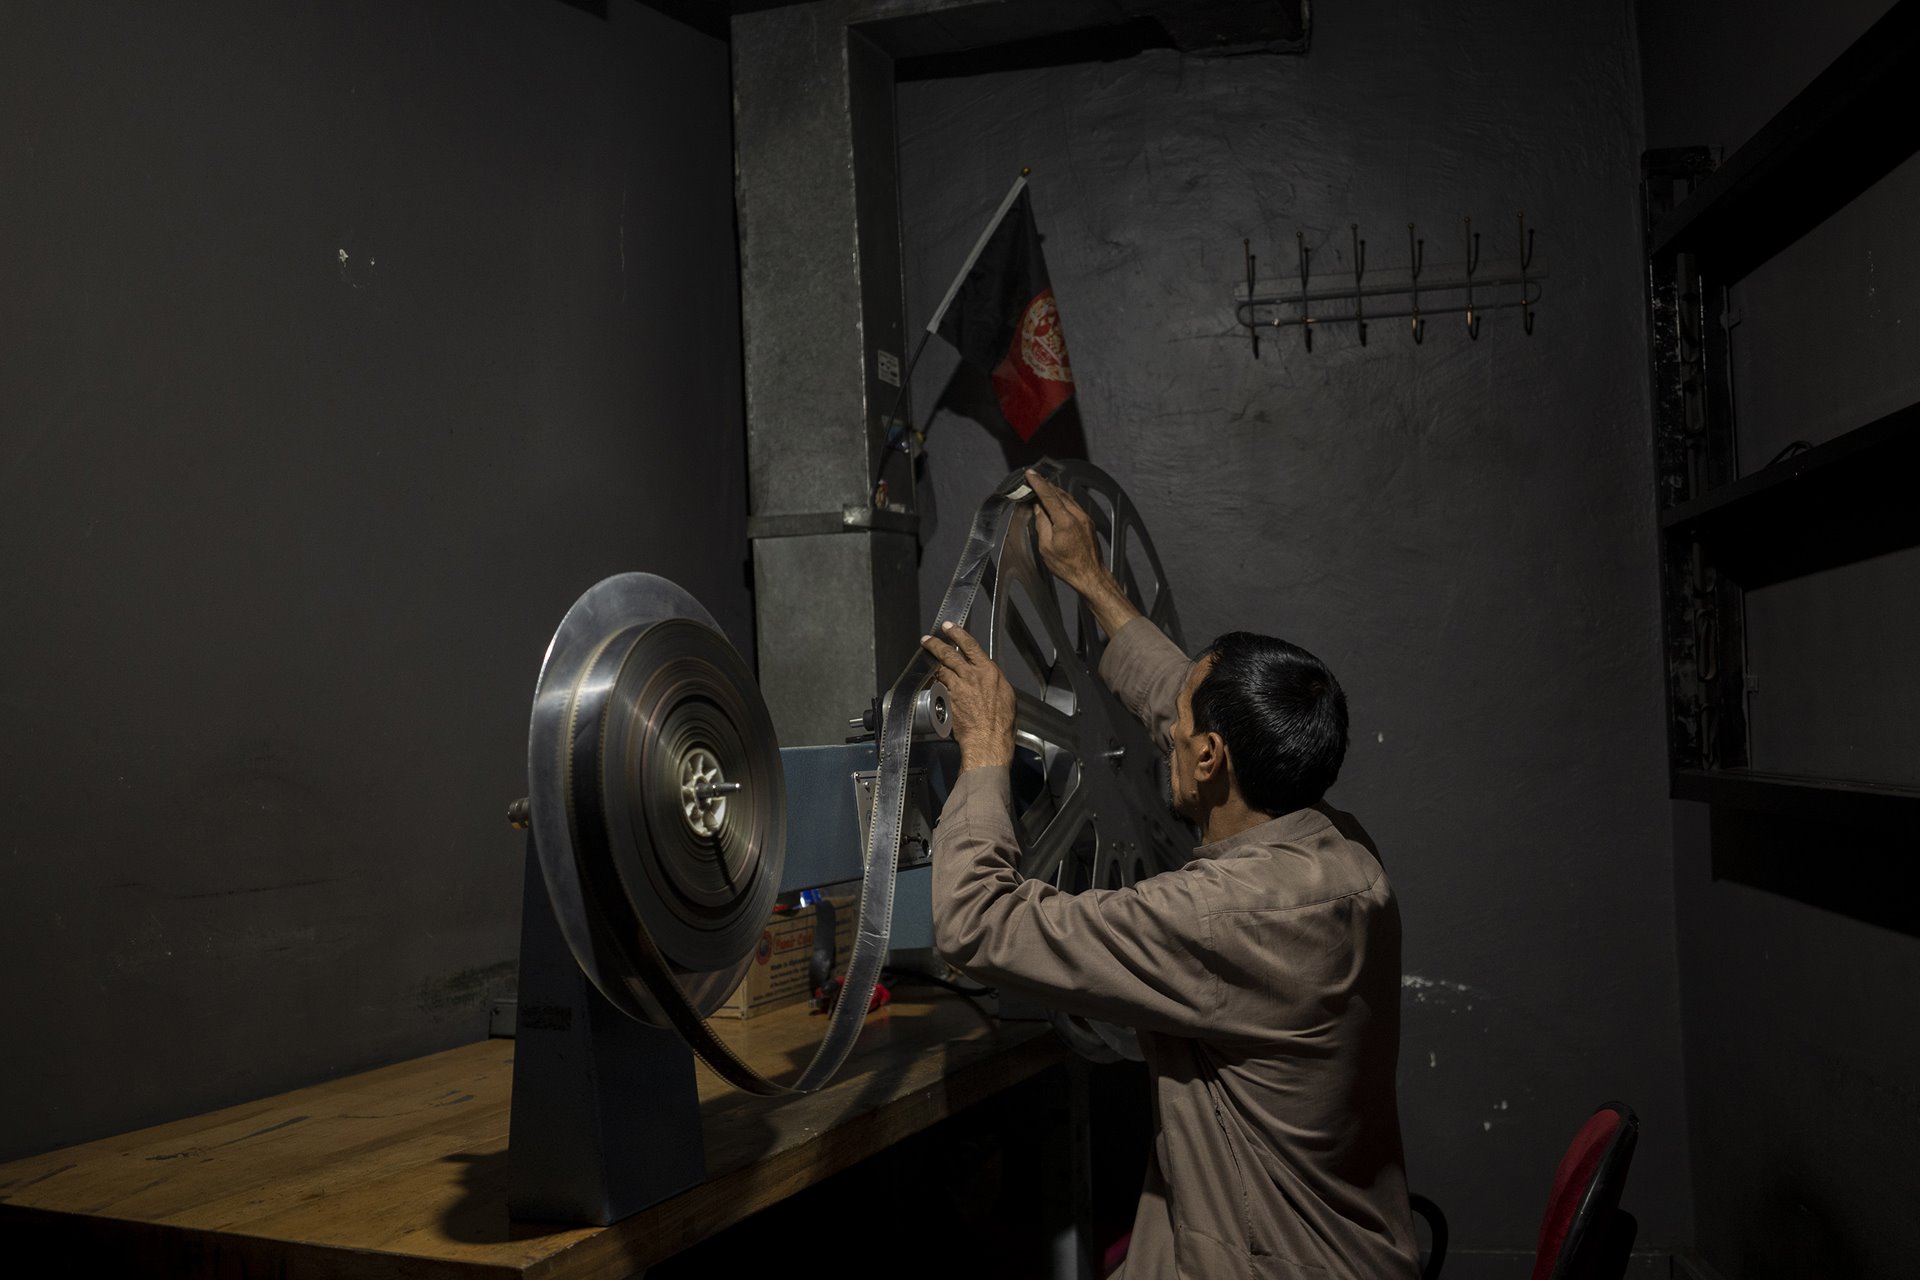 Rahmatullah Ezati inspects a roll of film for damage, in the projection room of the Ariana Cinema in Kabul, Afghanistan. Even though the Taliban closed the government-owned cinema a few months earlier, the staff still arrive for work daily, in the hope they will eventually be paid.